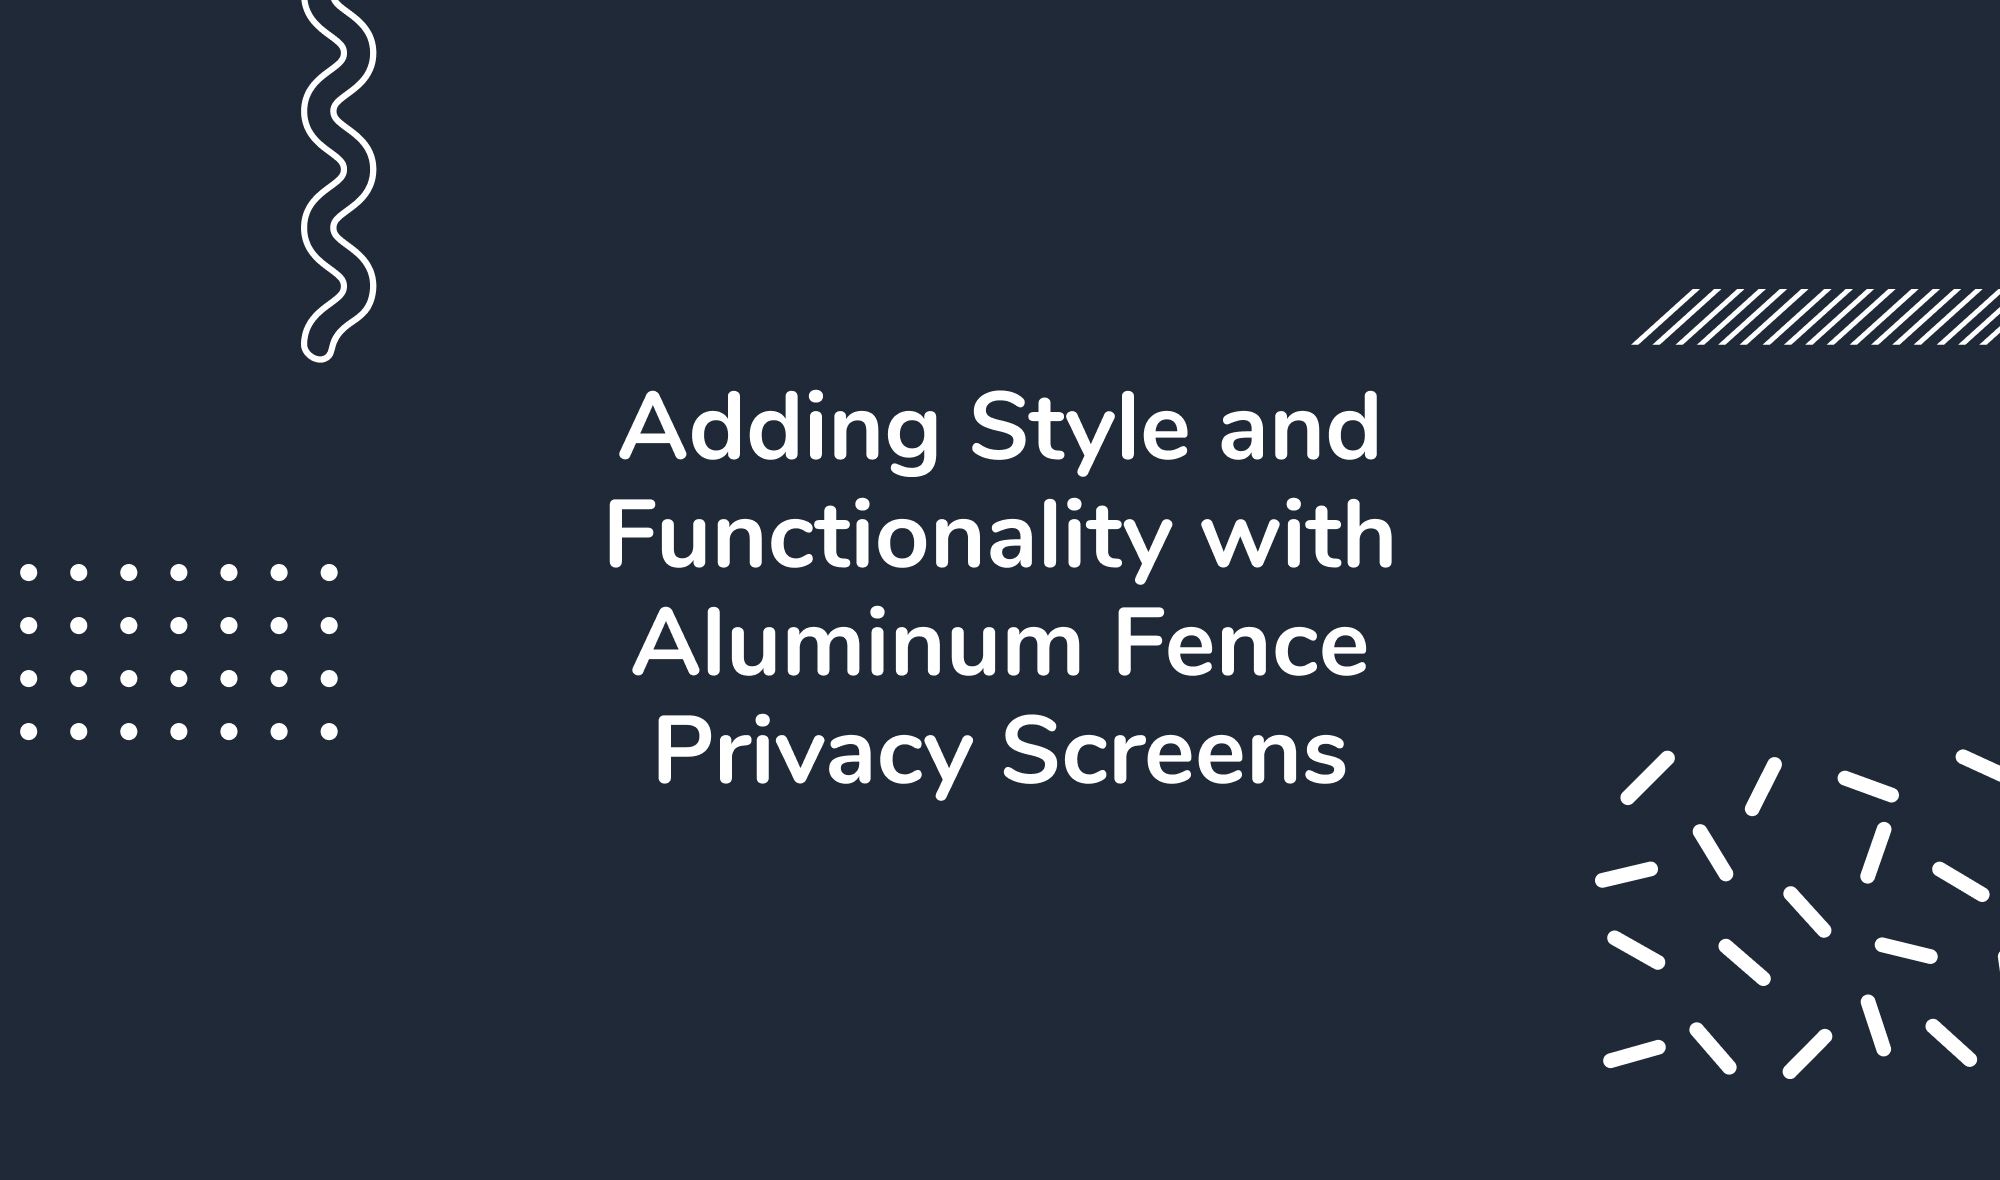 Adding Style and Functionality with Aluminum Fence Privacy Screens